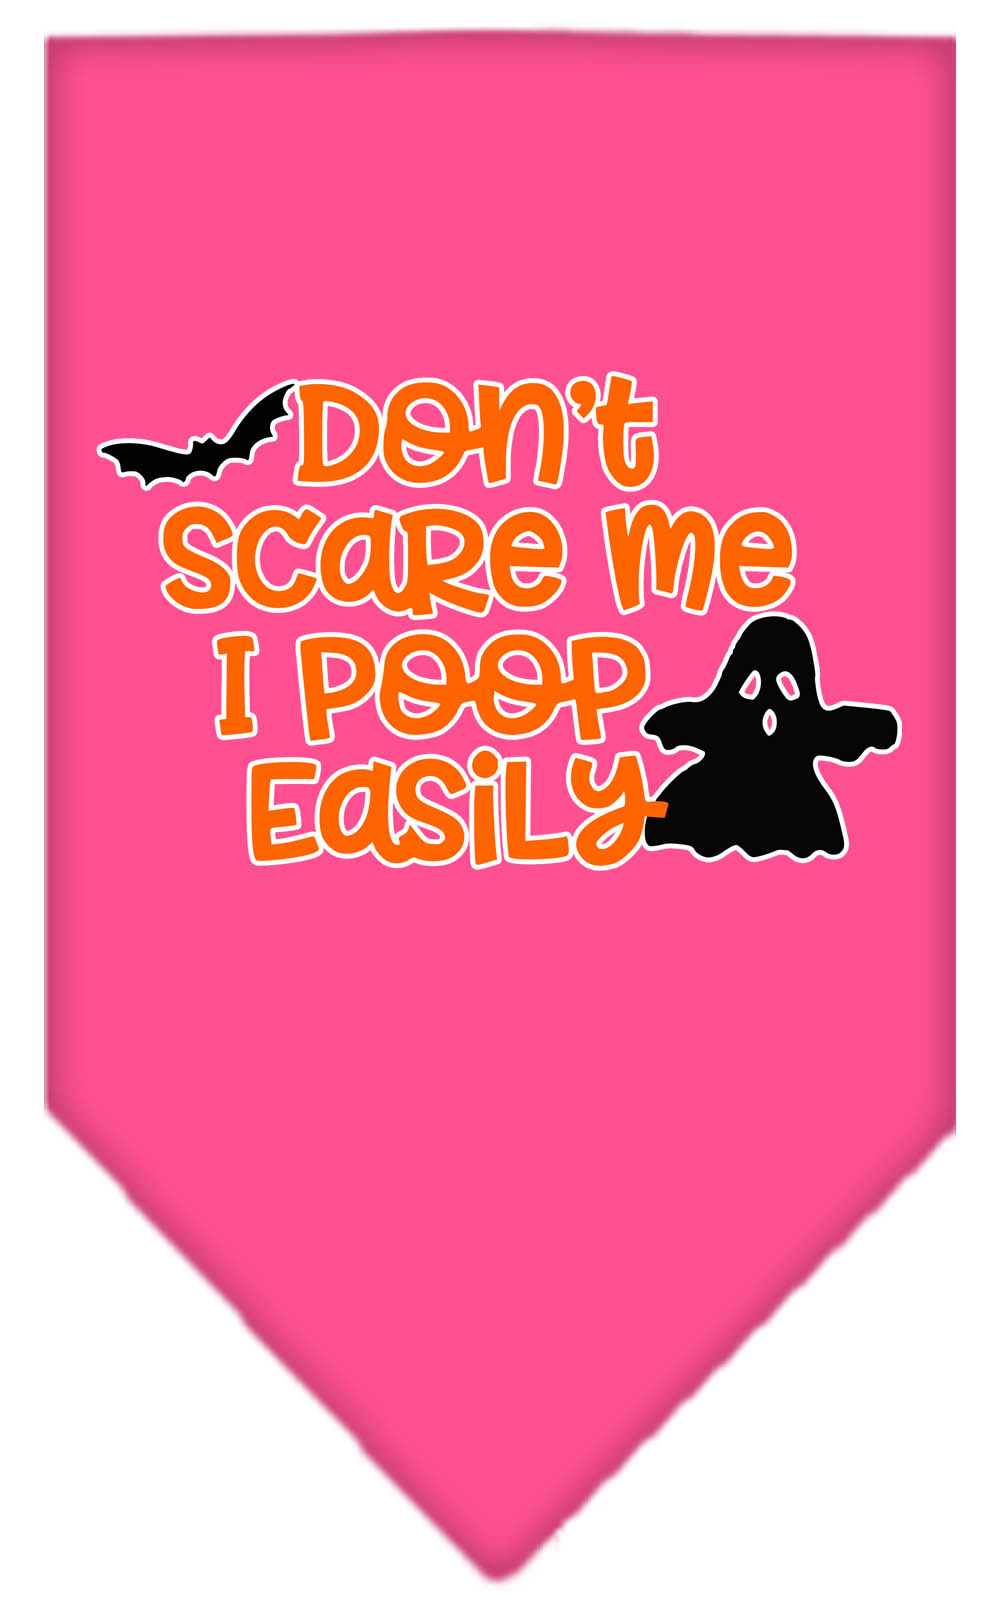 Don't Scare Me, Poops Easily Screen Print Bandana Bright Pink Small